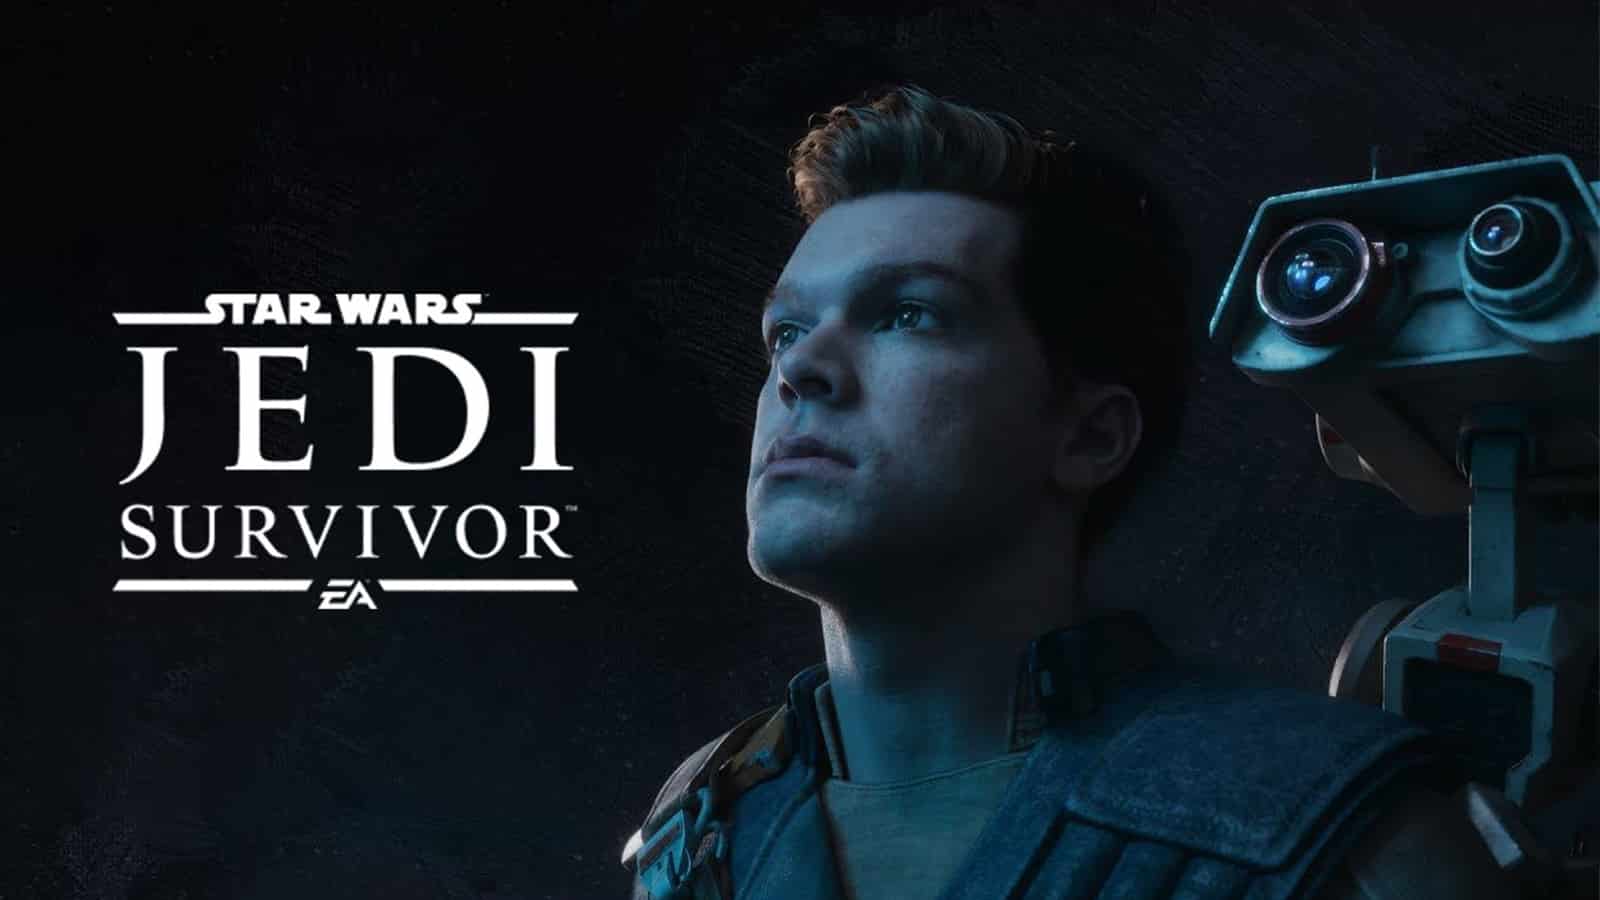 Cal Kestis and BD-1 looking into the distance as part of Star Wars Jedi: Survivor teaser.